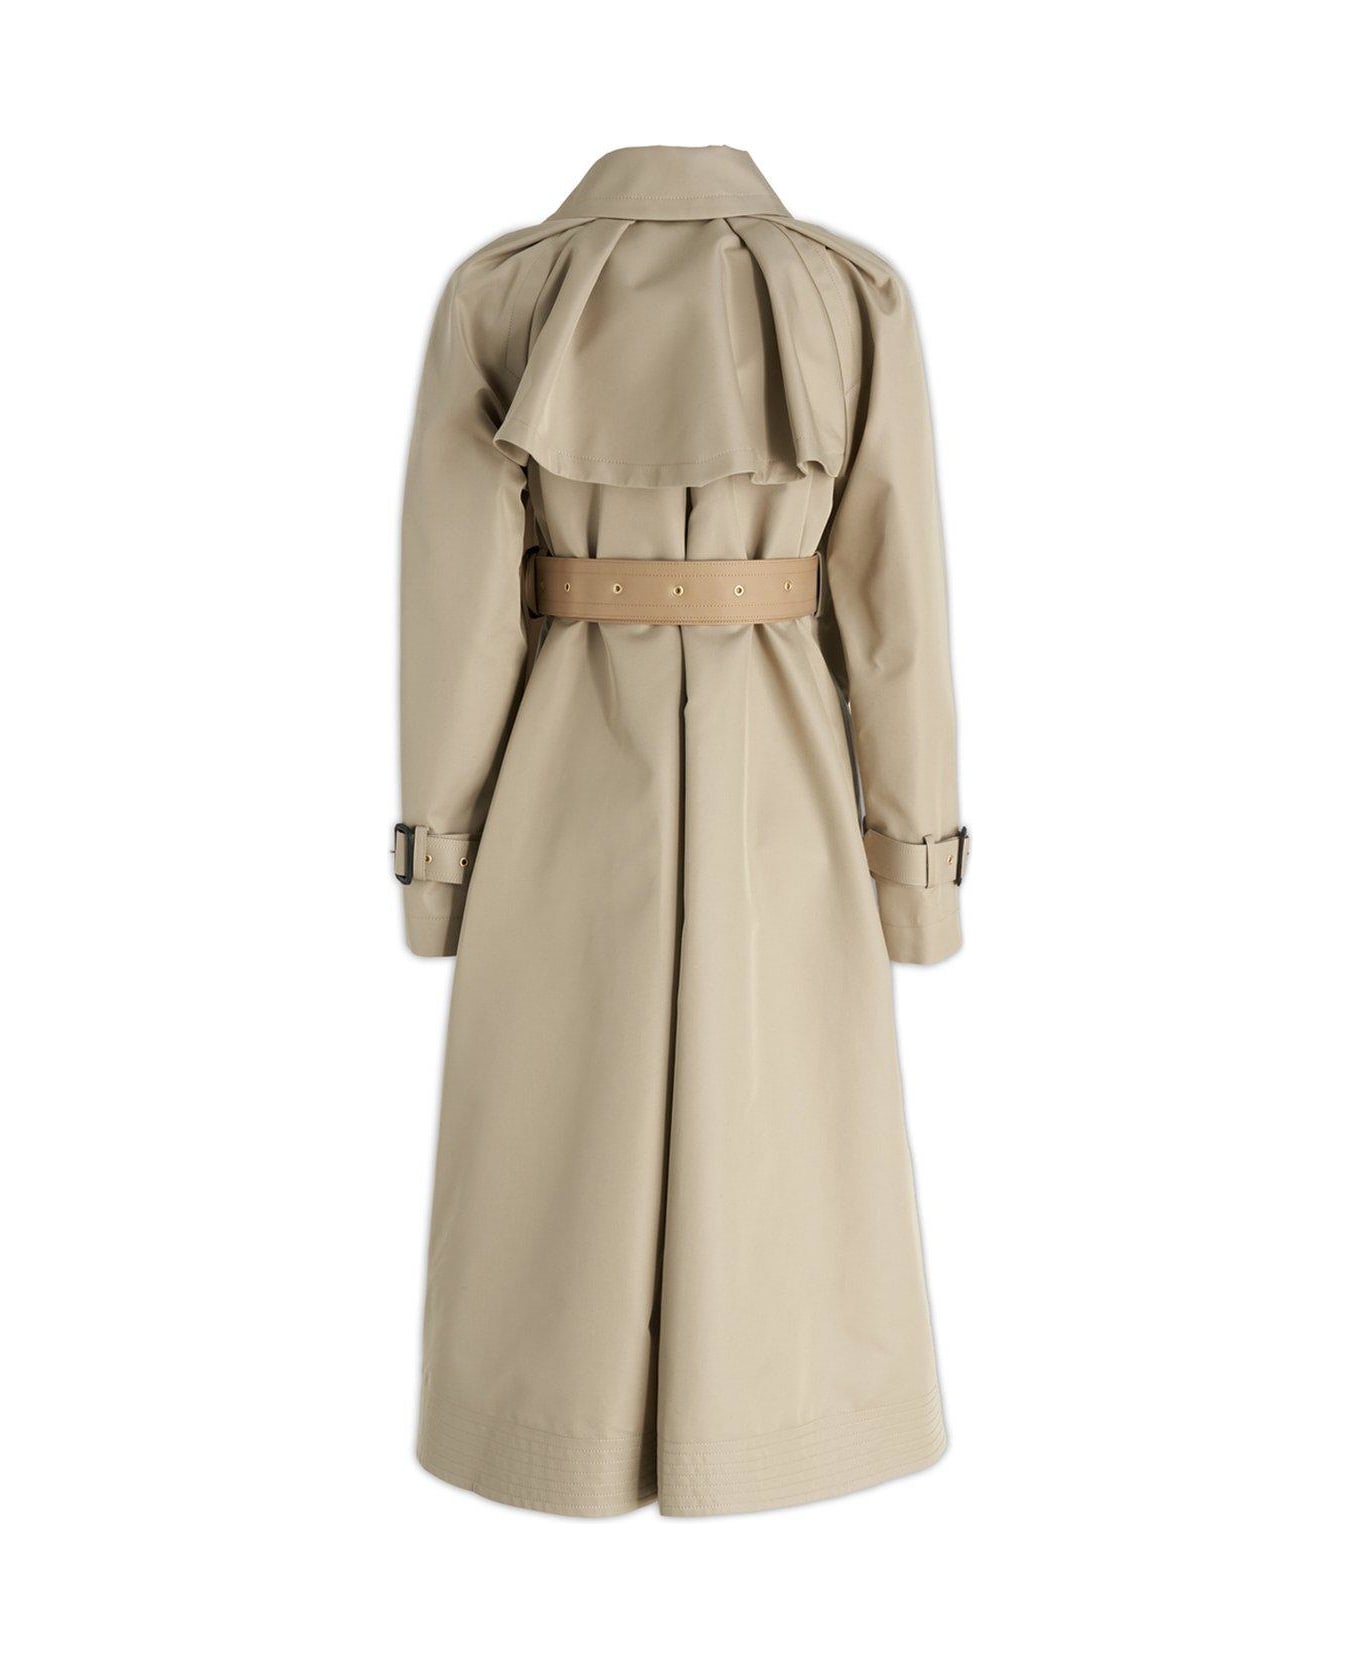 Sacai Two-toned Belted Waist Coat - Beige